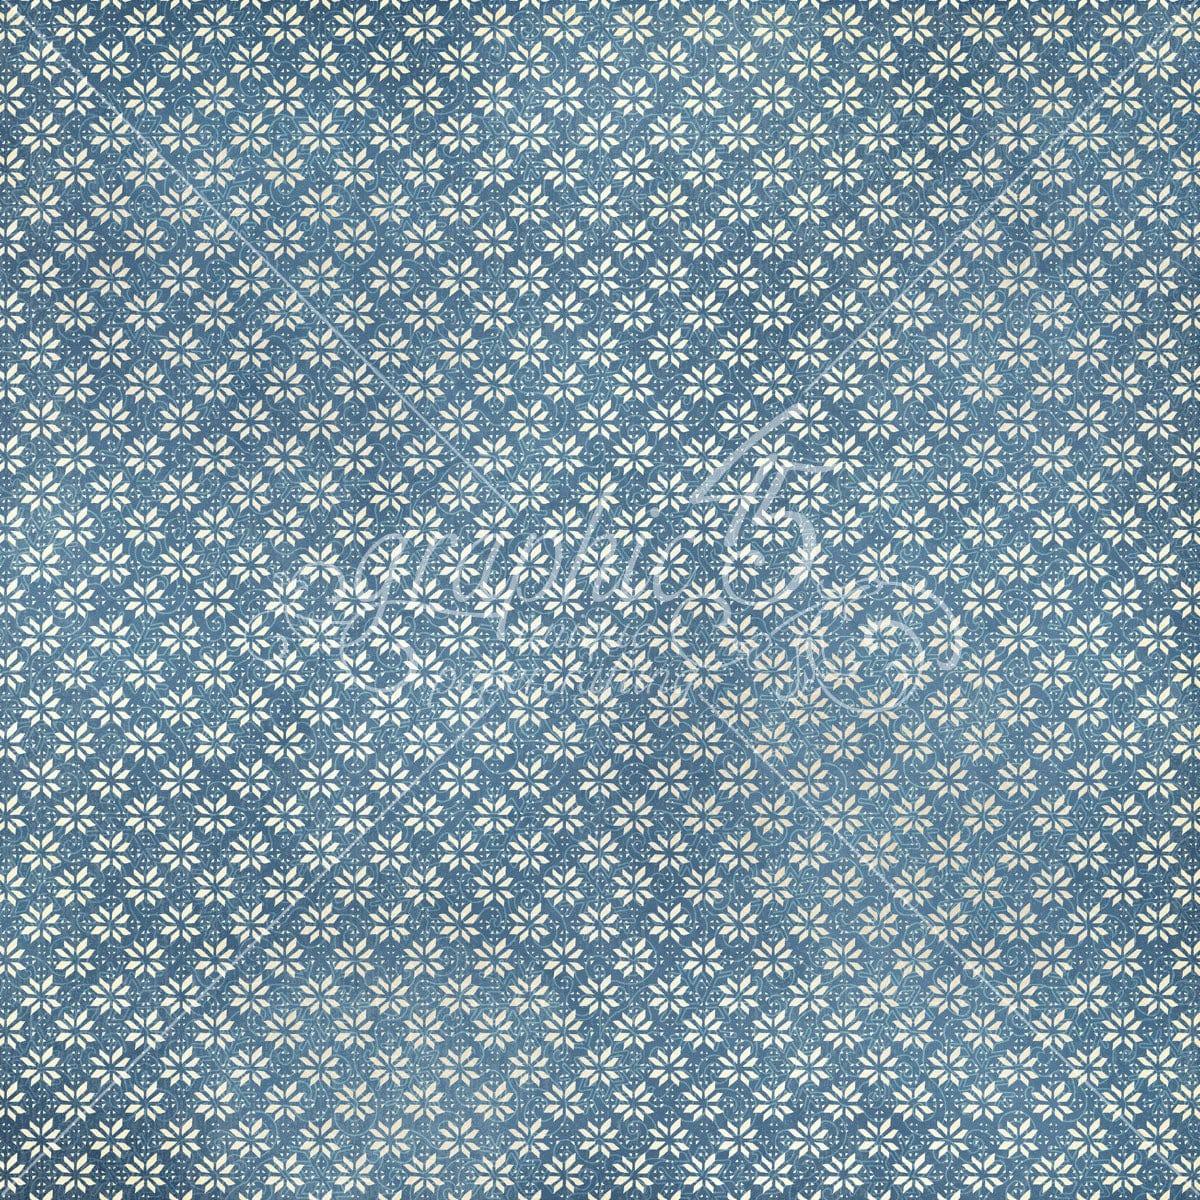 Let's Get Cozy Collection Let's Get Cozy 12 x 12 Double-Sided Scrapbook Paper by Graphic 45 - Scrapbook Supply Companies